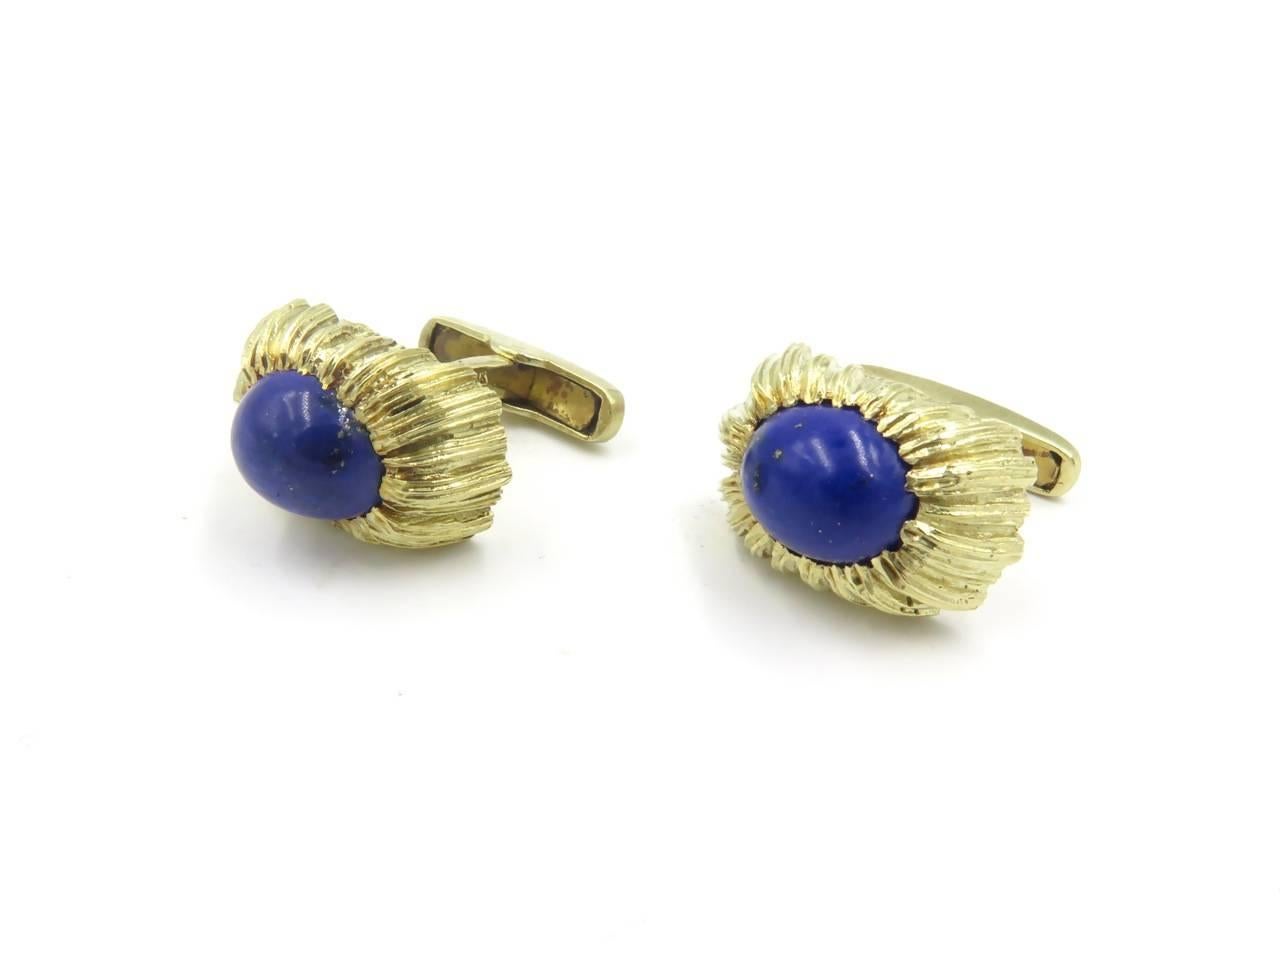 A pair of 14 karat yellow gold and lapis lazuli cufflinks. Each single link centering an oval cabochon lapis lazuli, measuring approximately 12.00 x 10.00mm, within a regular fluted and textured surround, joined by a bar to a swivel link. Length is